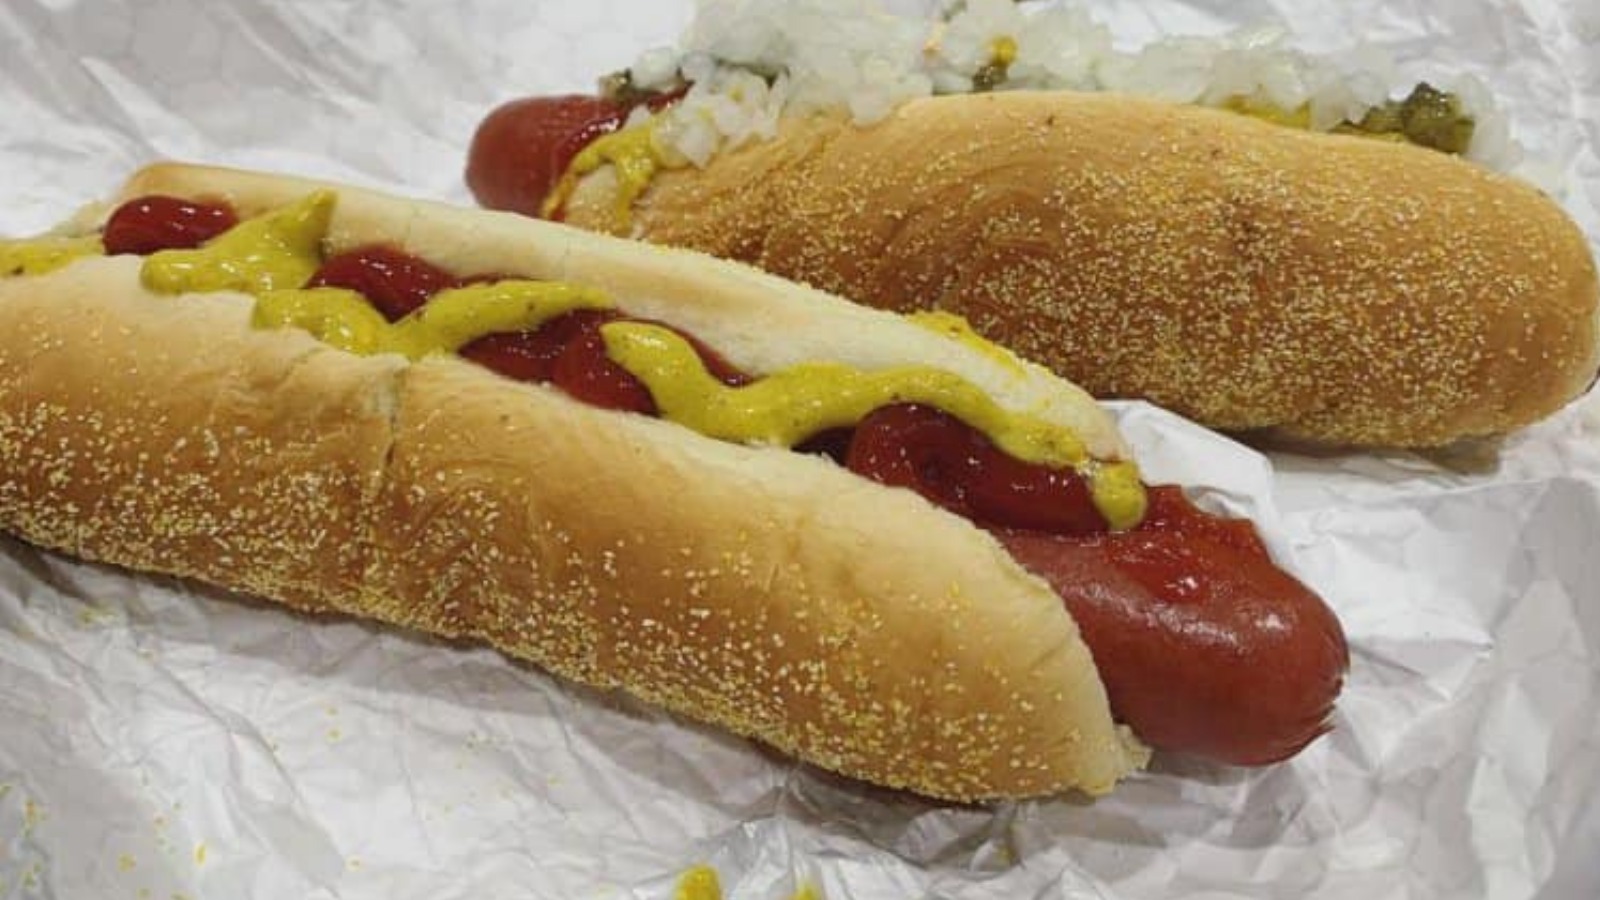 Costco #39 s Forbidden Glizzy Will Change The Way You Think About Hot Dogs